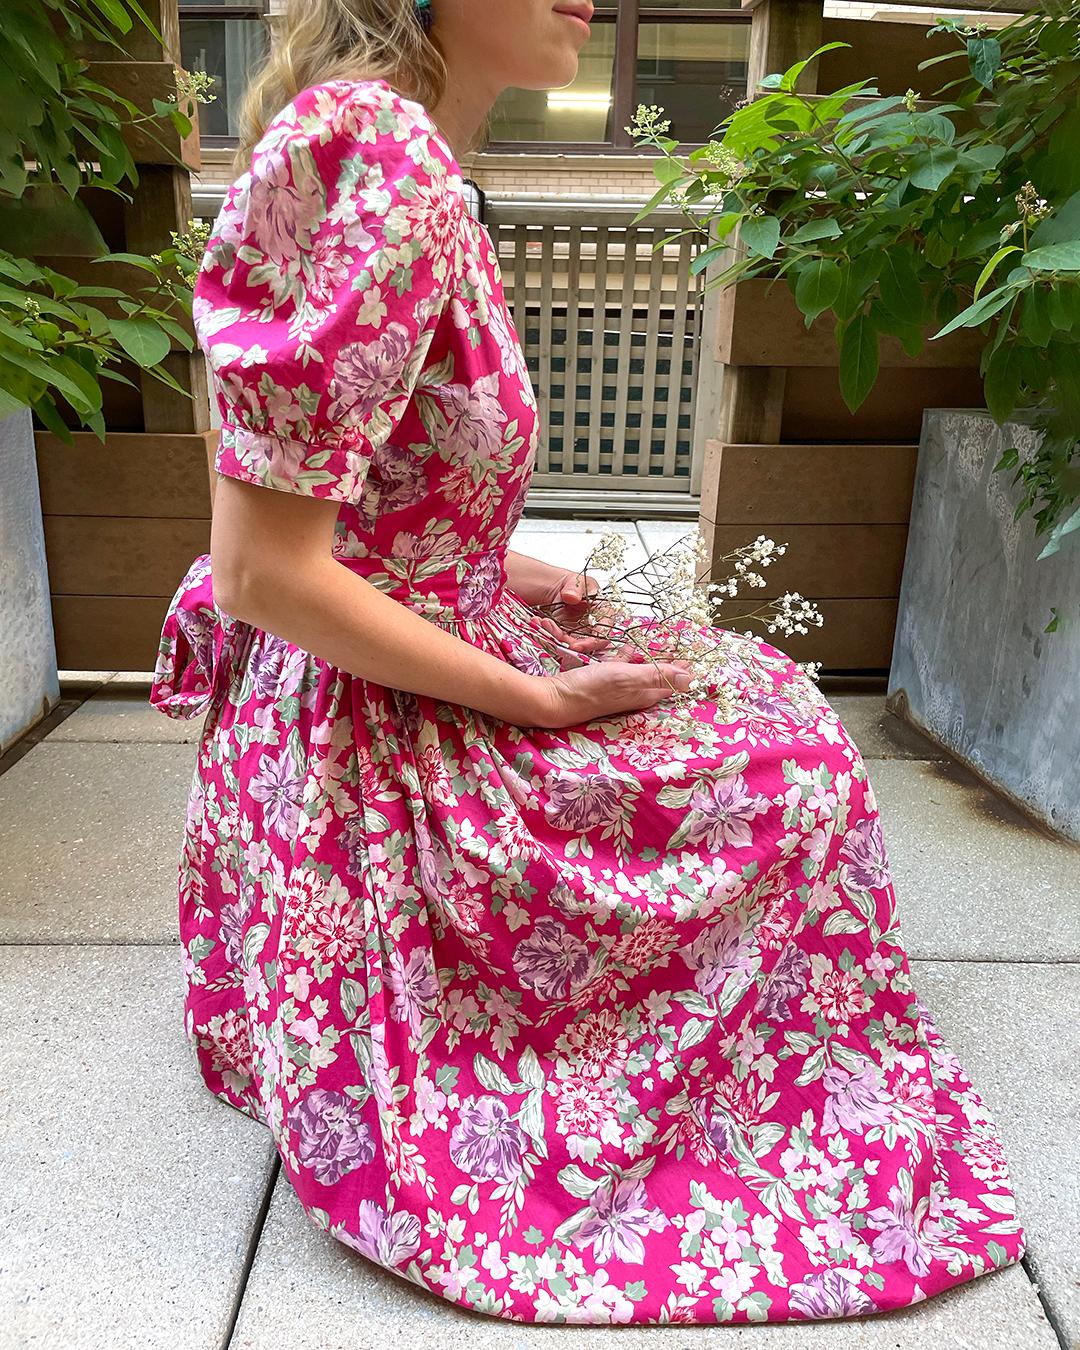 Vintage Laura Ashley Floral Dress: Collectors, take note: this 1980s floral dress is classic Laura Ashley, with its floral chintz print, square neckline, puff sleeves, fitted bodice with a slightly dropped waistline, and full skirt— SO many classic